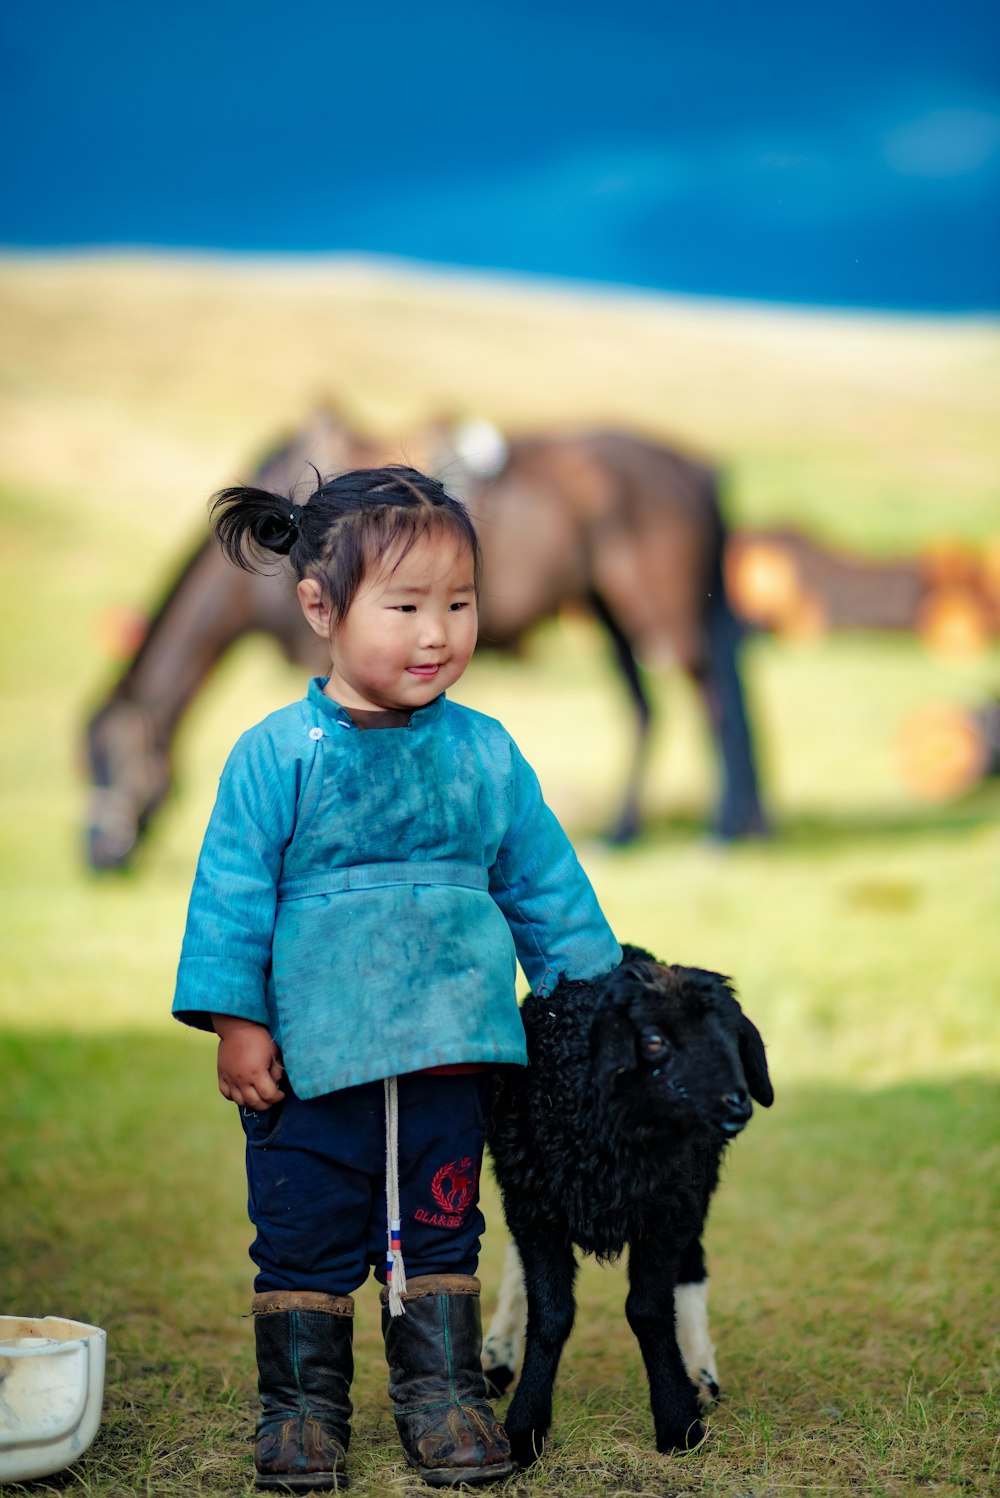 a little girl standing next to a black dog